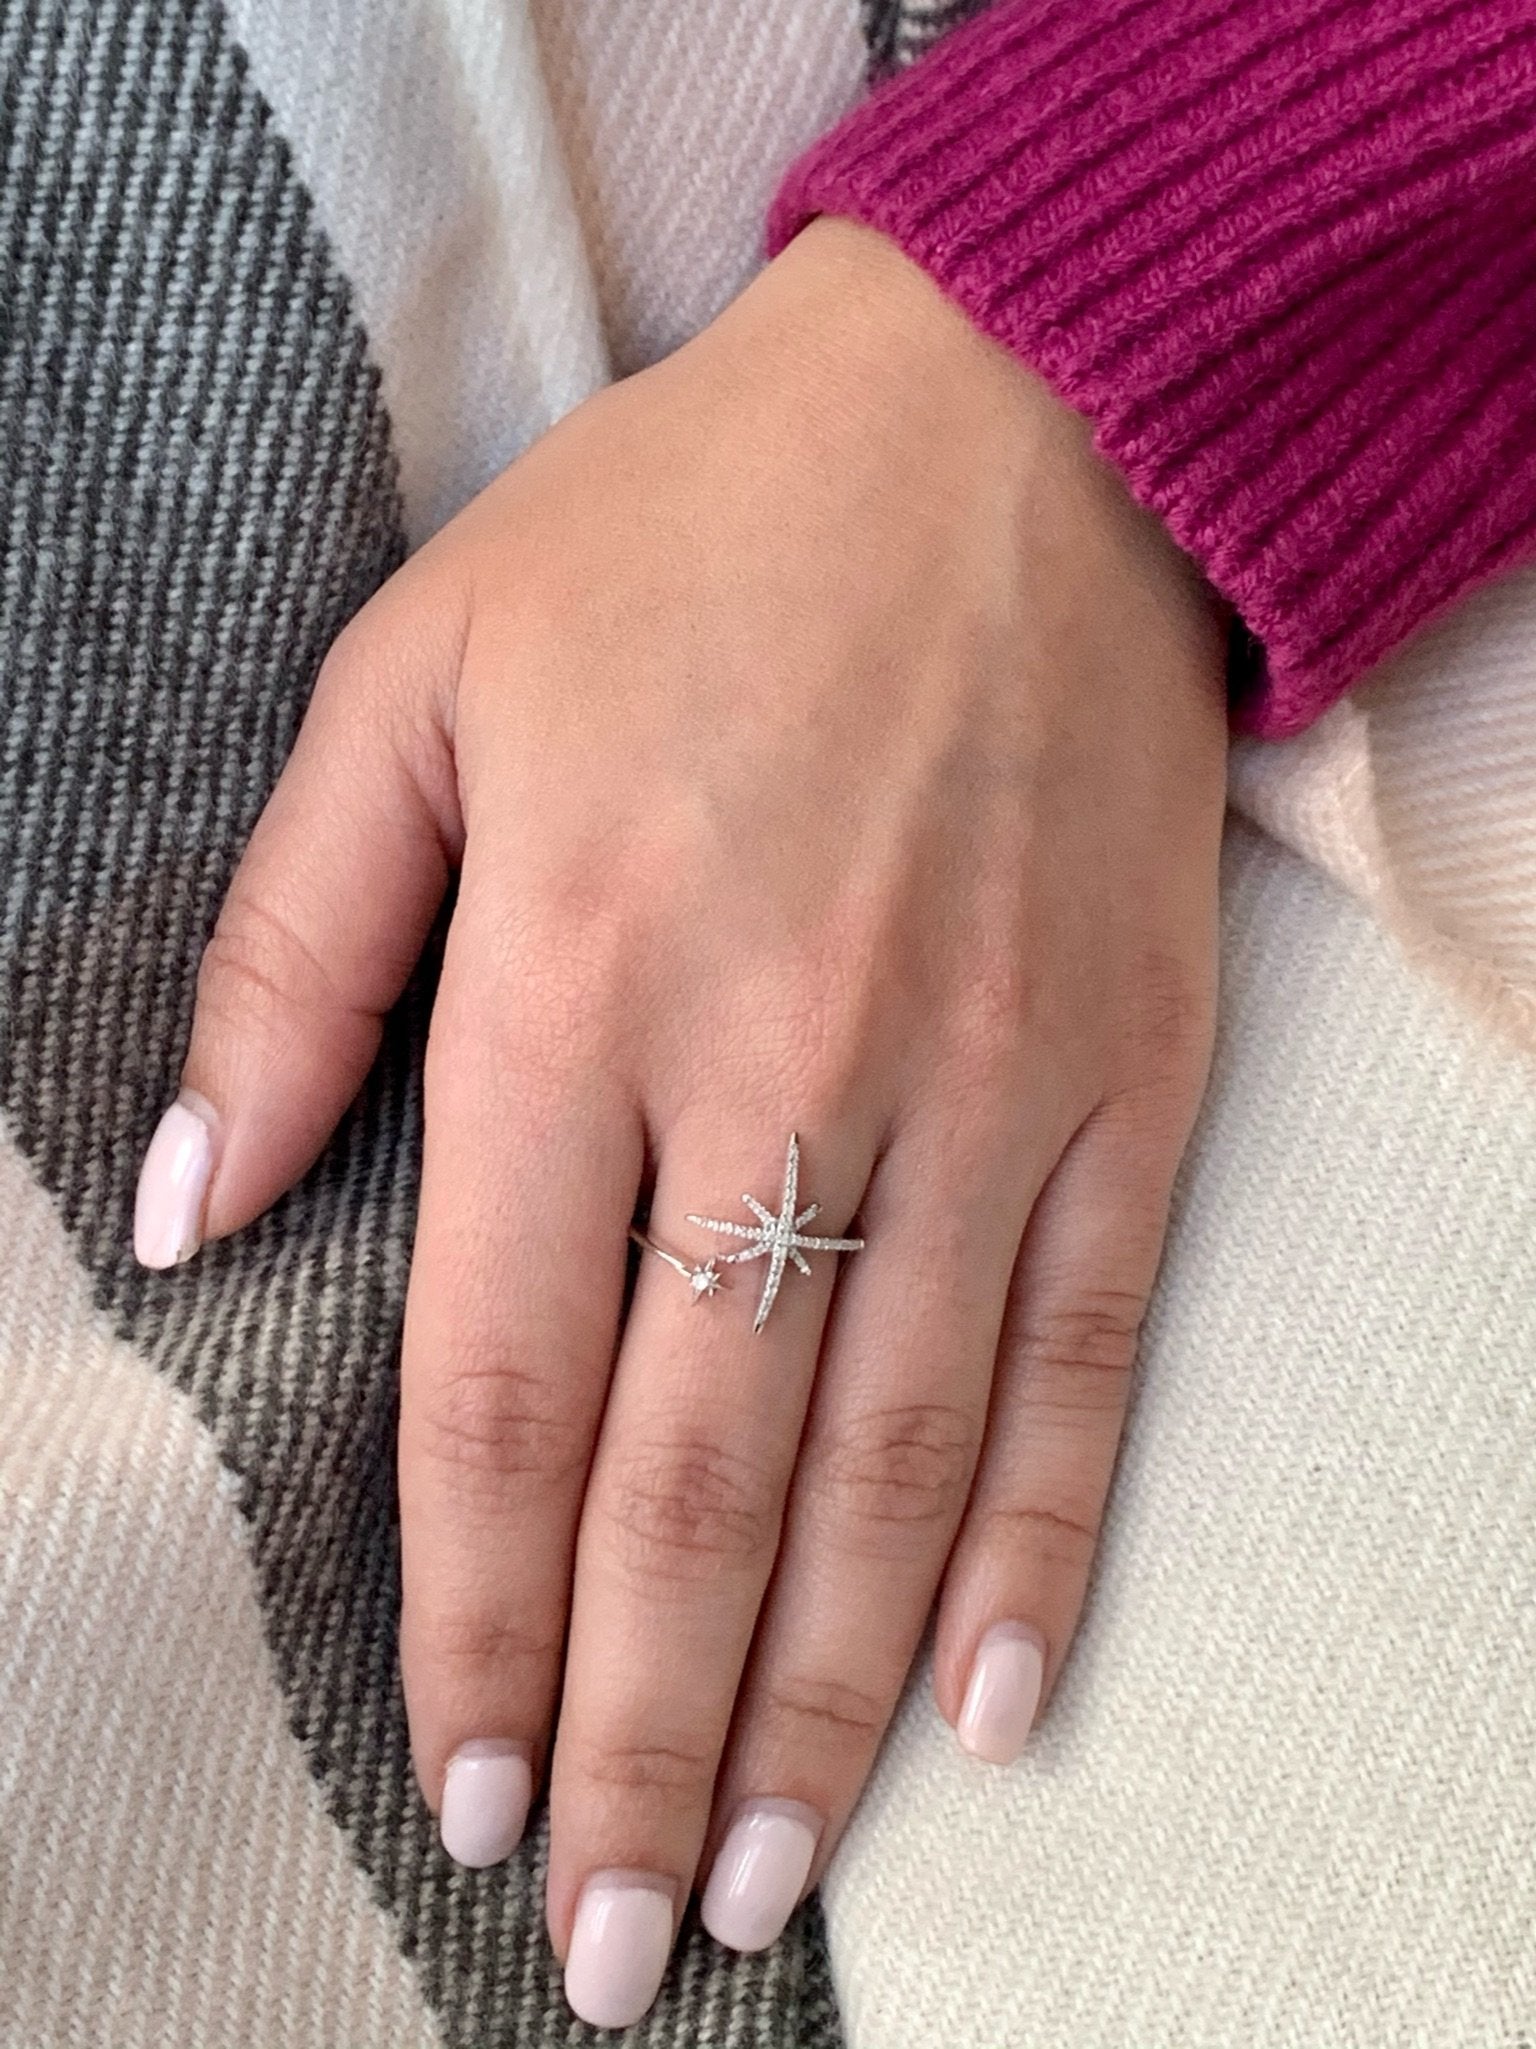 North Star Duo Diamond Ring in Sterling Silver